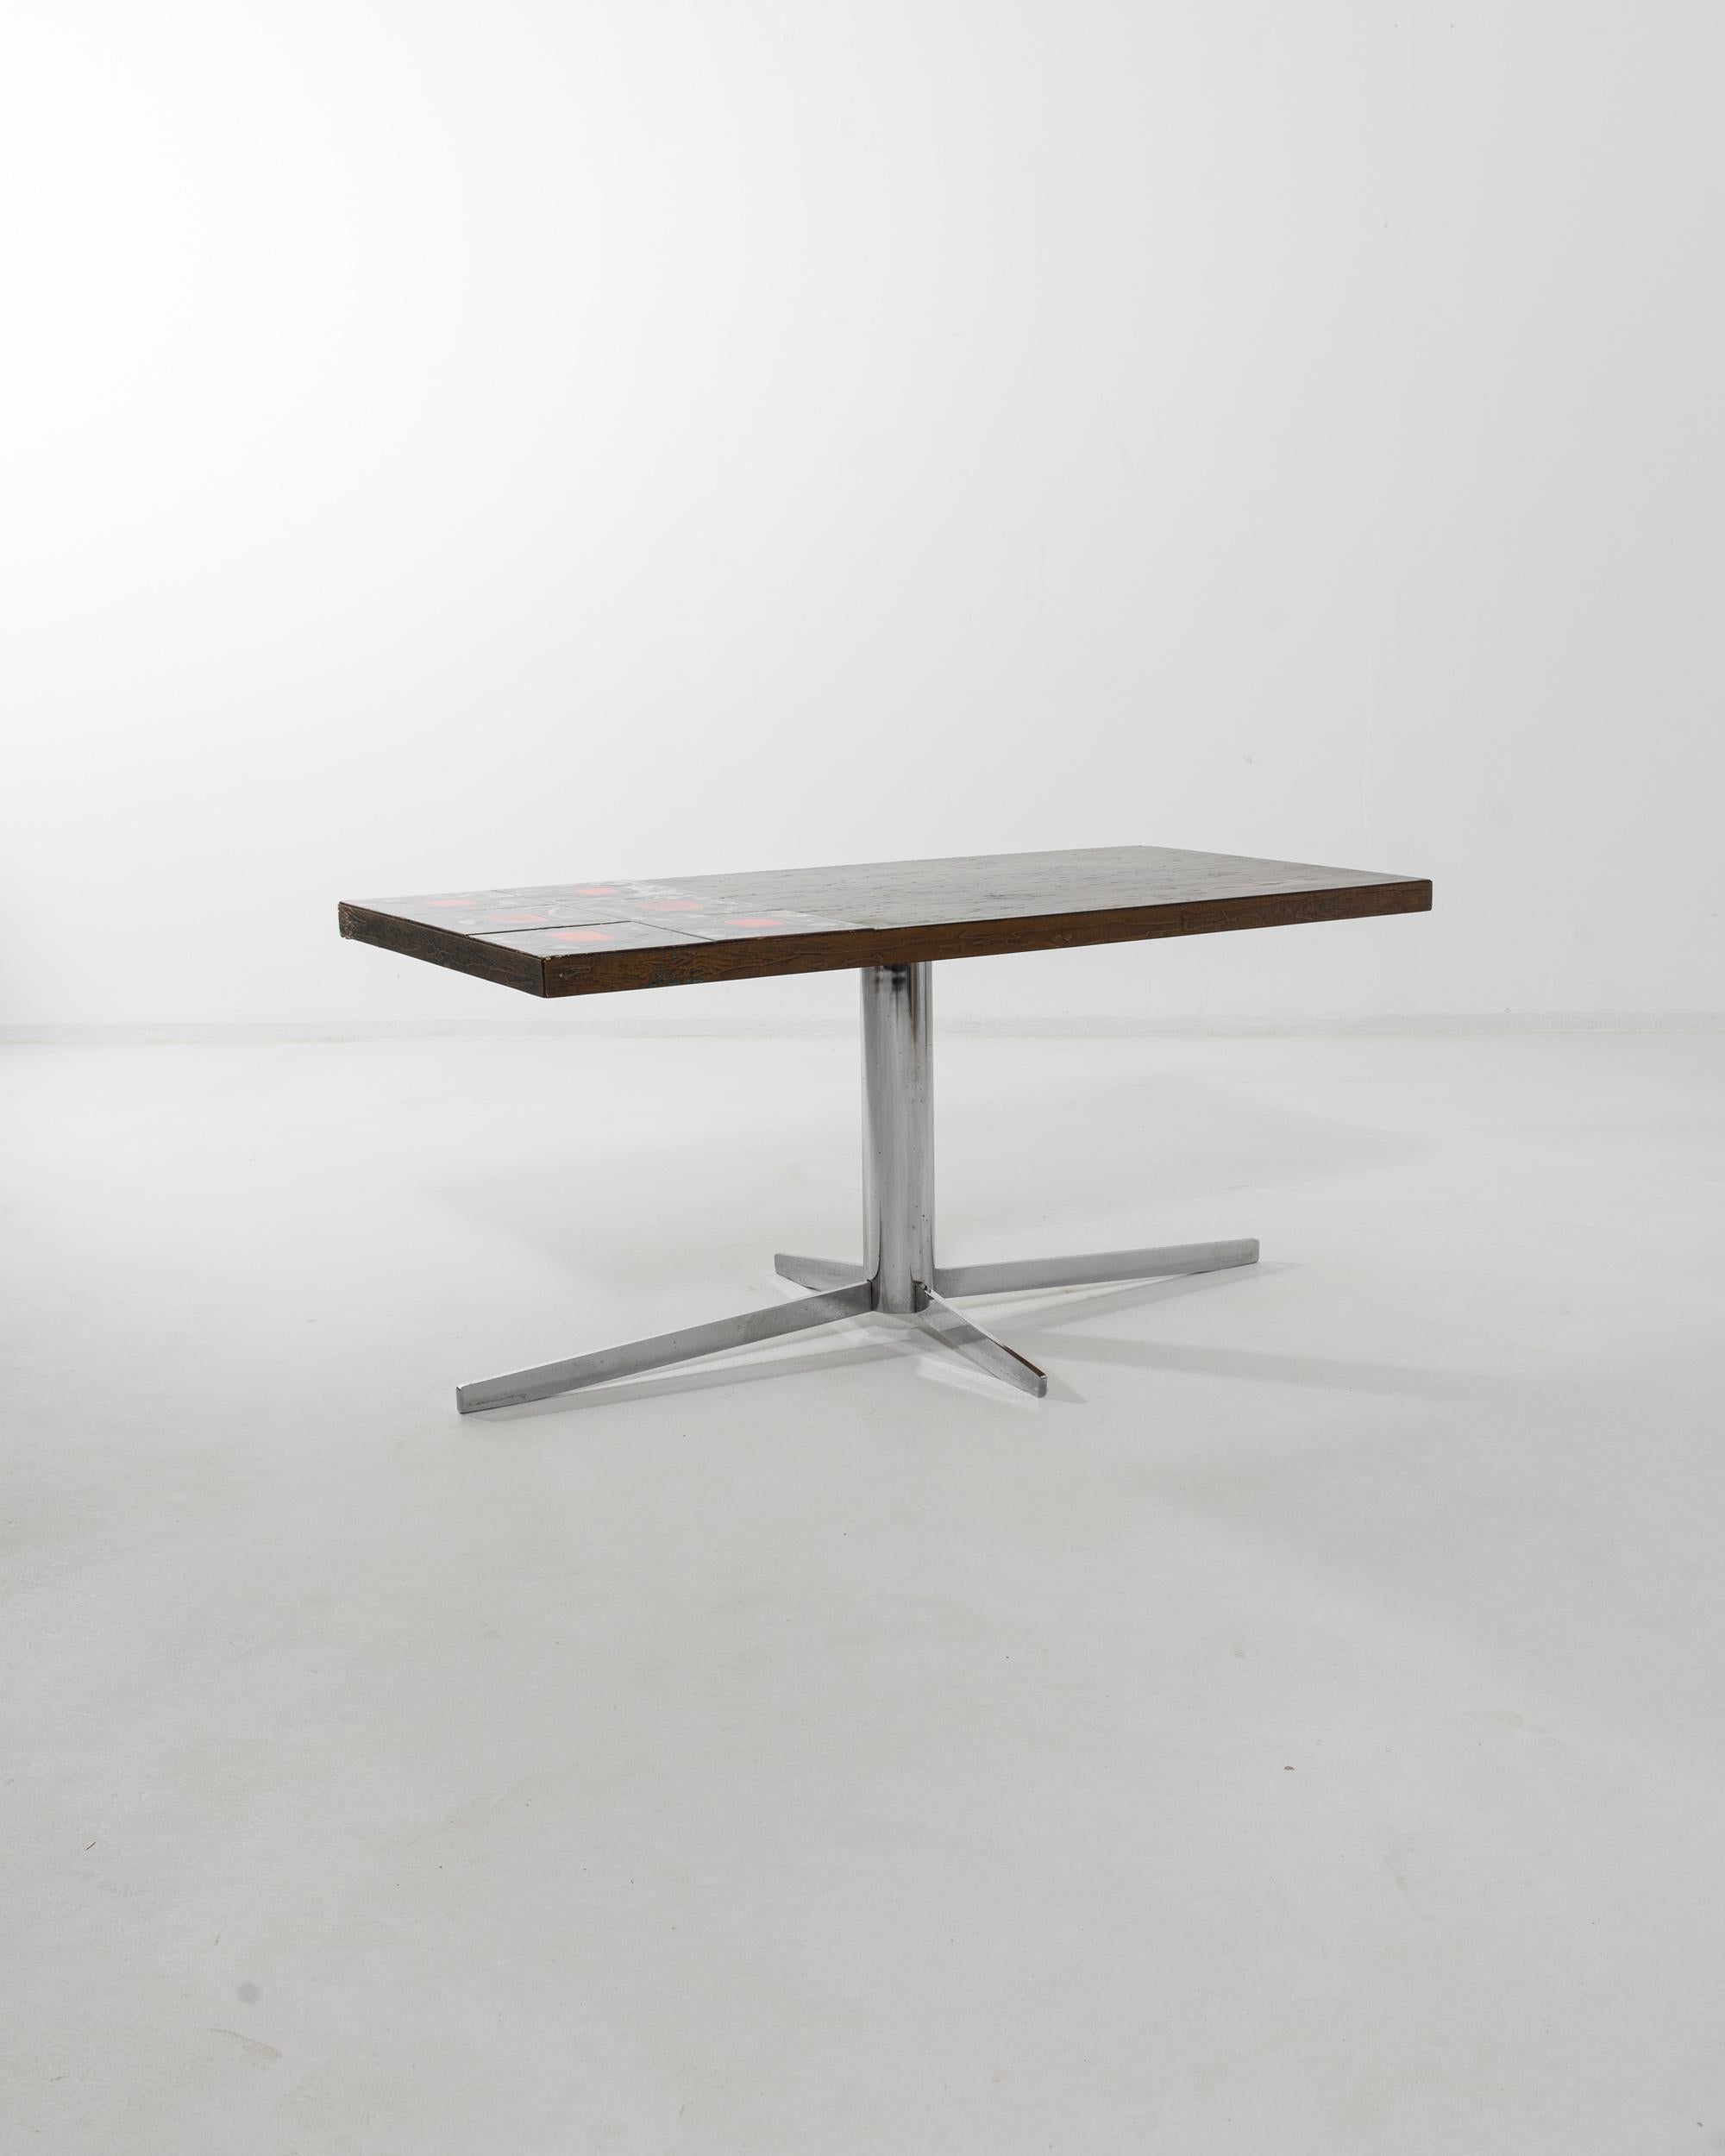 Made in 20th century France, this vintage coffee table epitomizes the bold, idiosyncratic designs of the 1960s. A simple rectangular tabletop rests upon a streamlined base of polished silver steel —but the sleek minimalism of the silhouette is